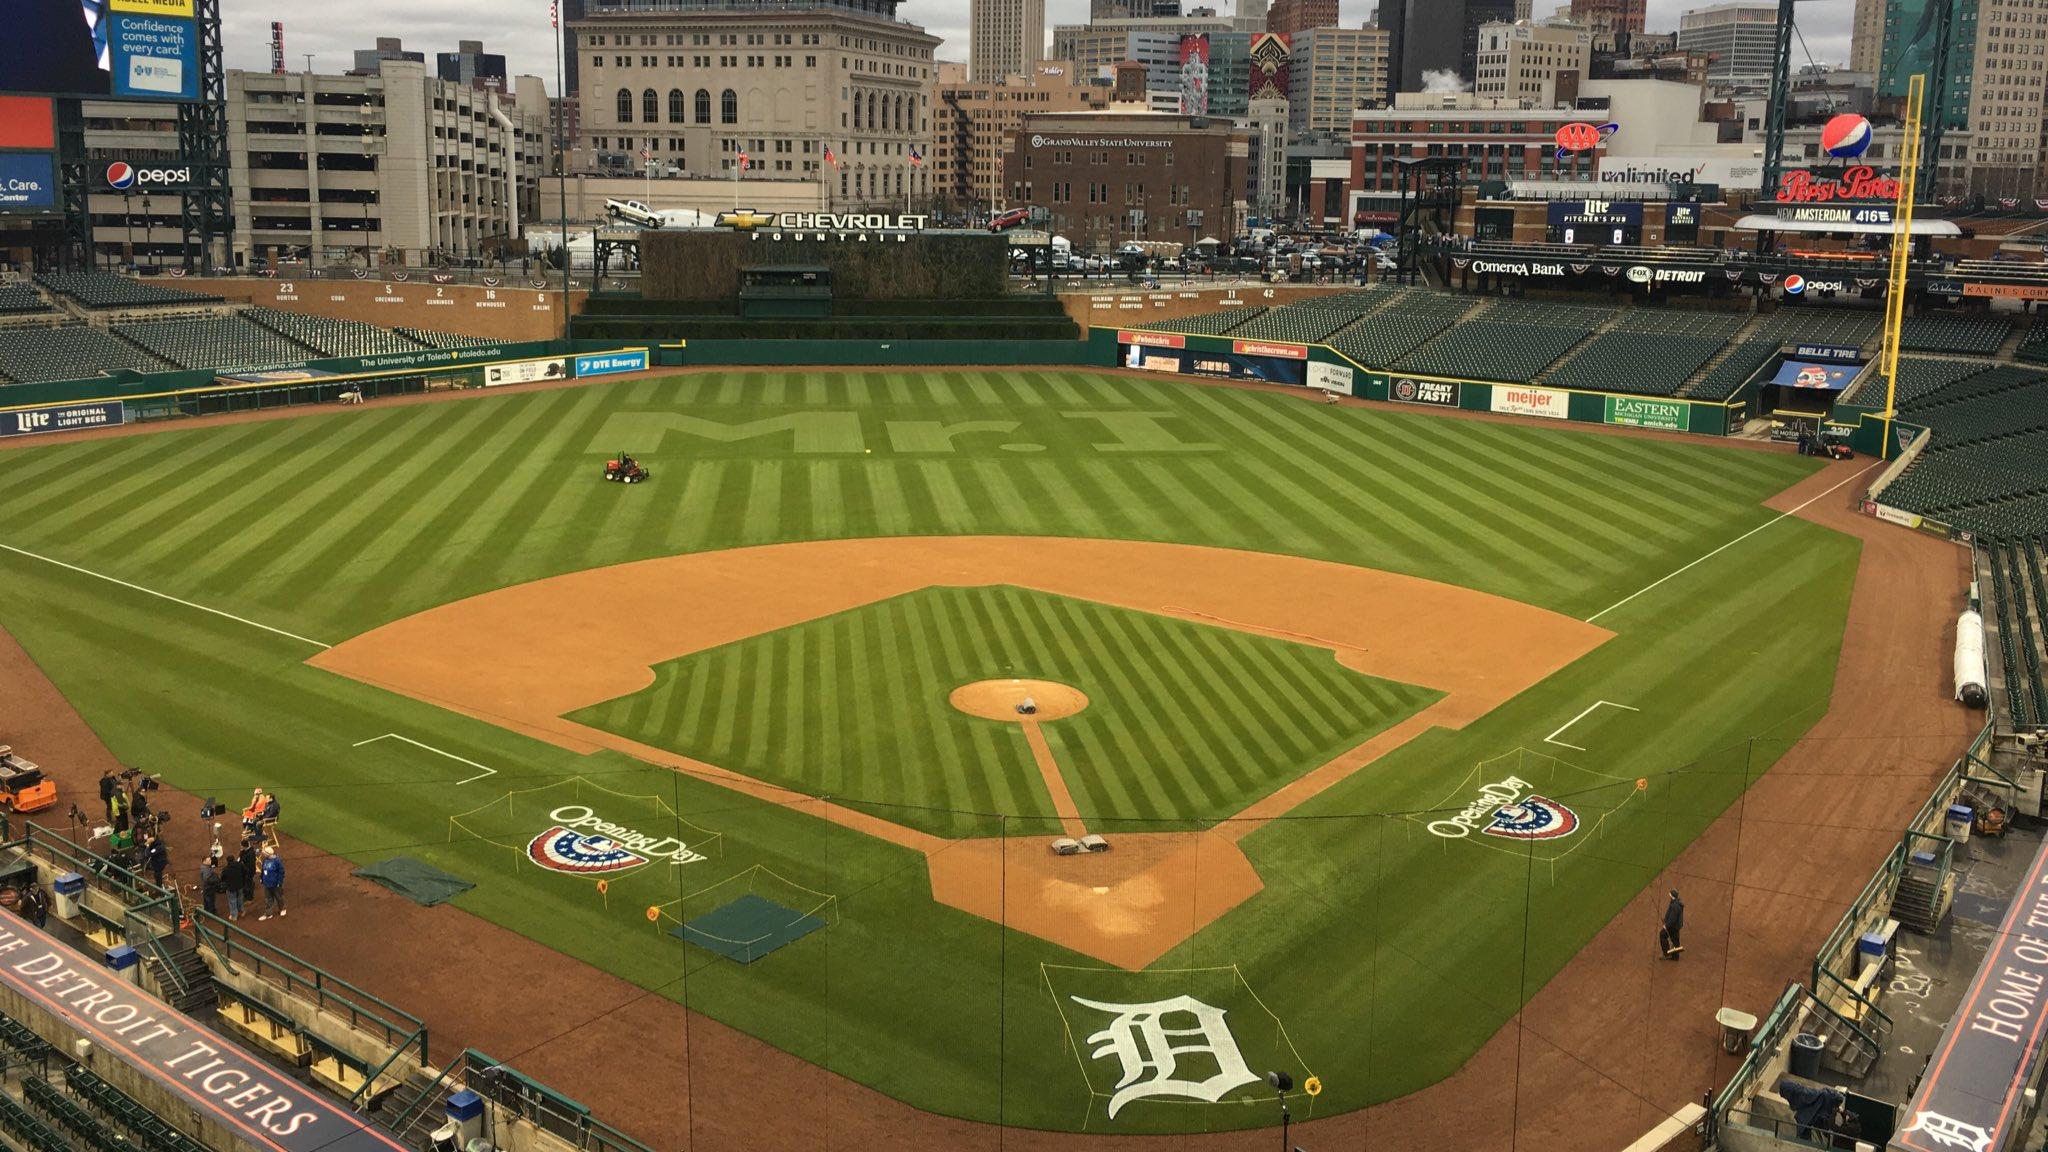 Report: Comerica Park to get 'meaningful' renovation